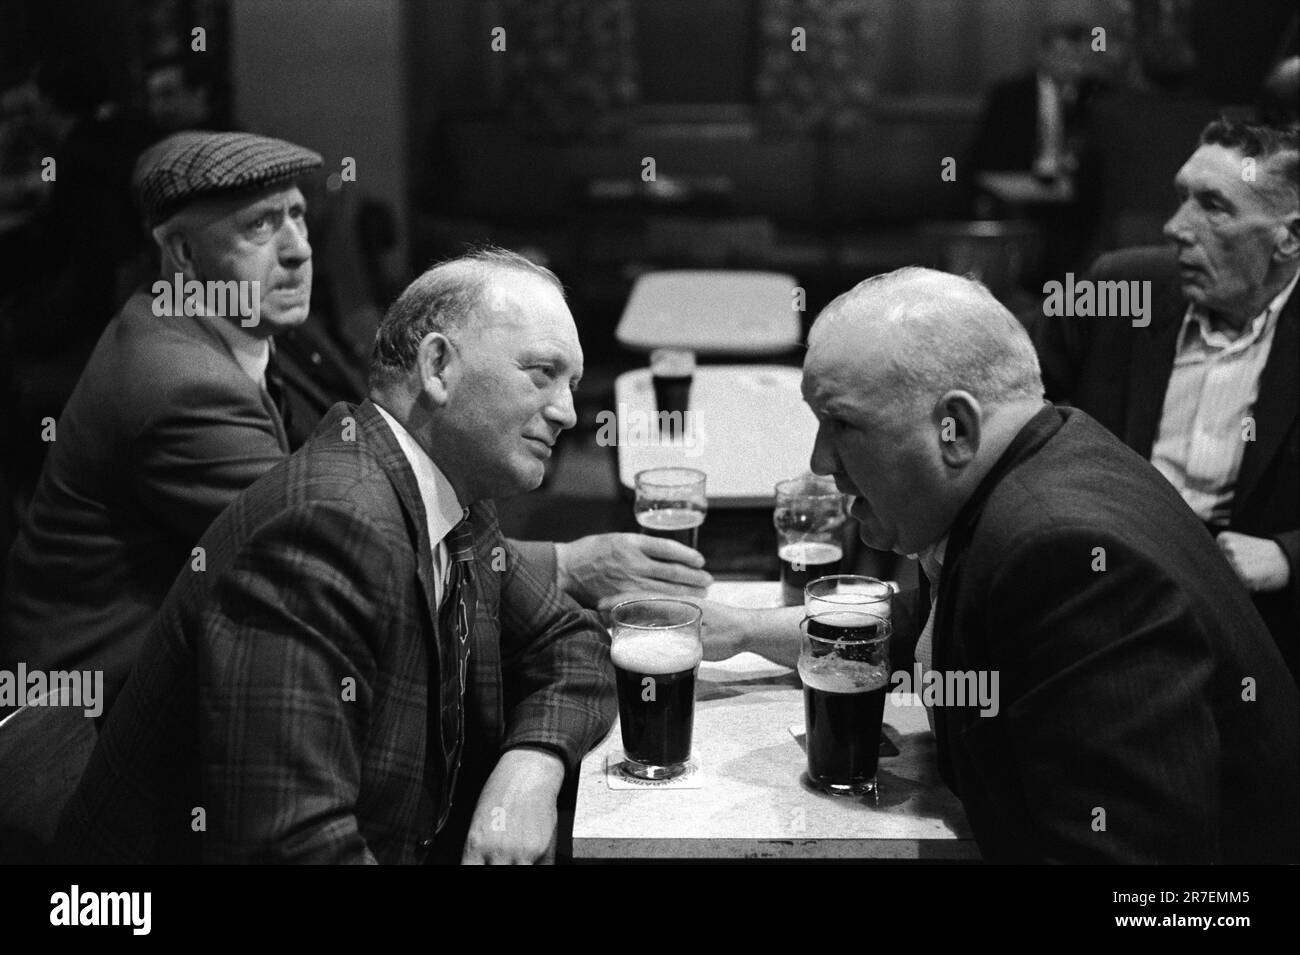 Pints of beer. Saturday night at Byker and St Peters Working Men's Club, Newcastle upon Tyne, Tyne and Wear, northern England circa 1973. 1970S UK HOMER SYKES Stock Photo